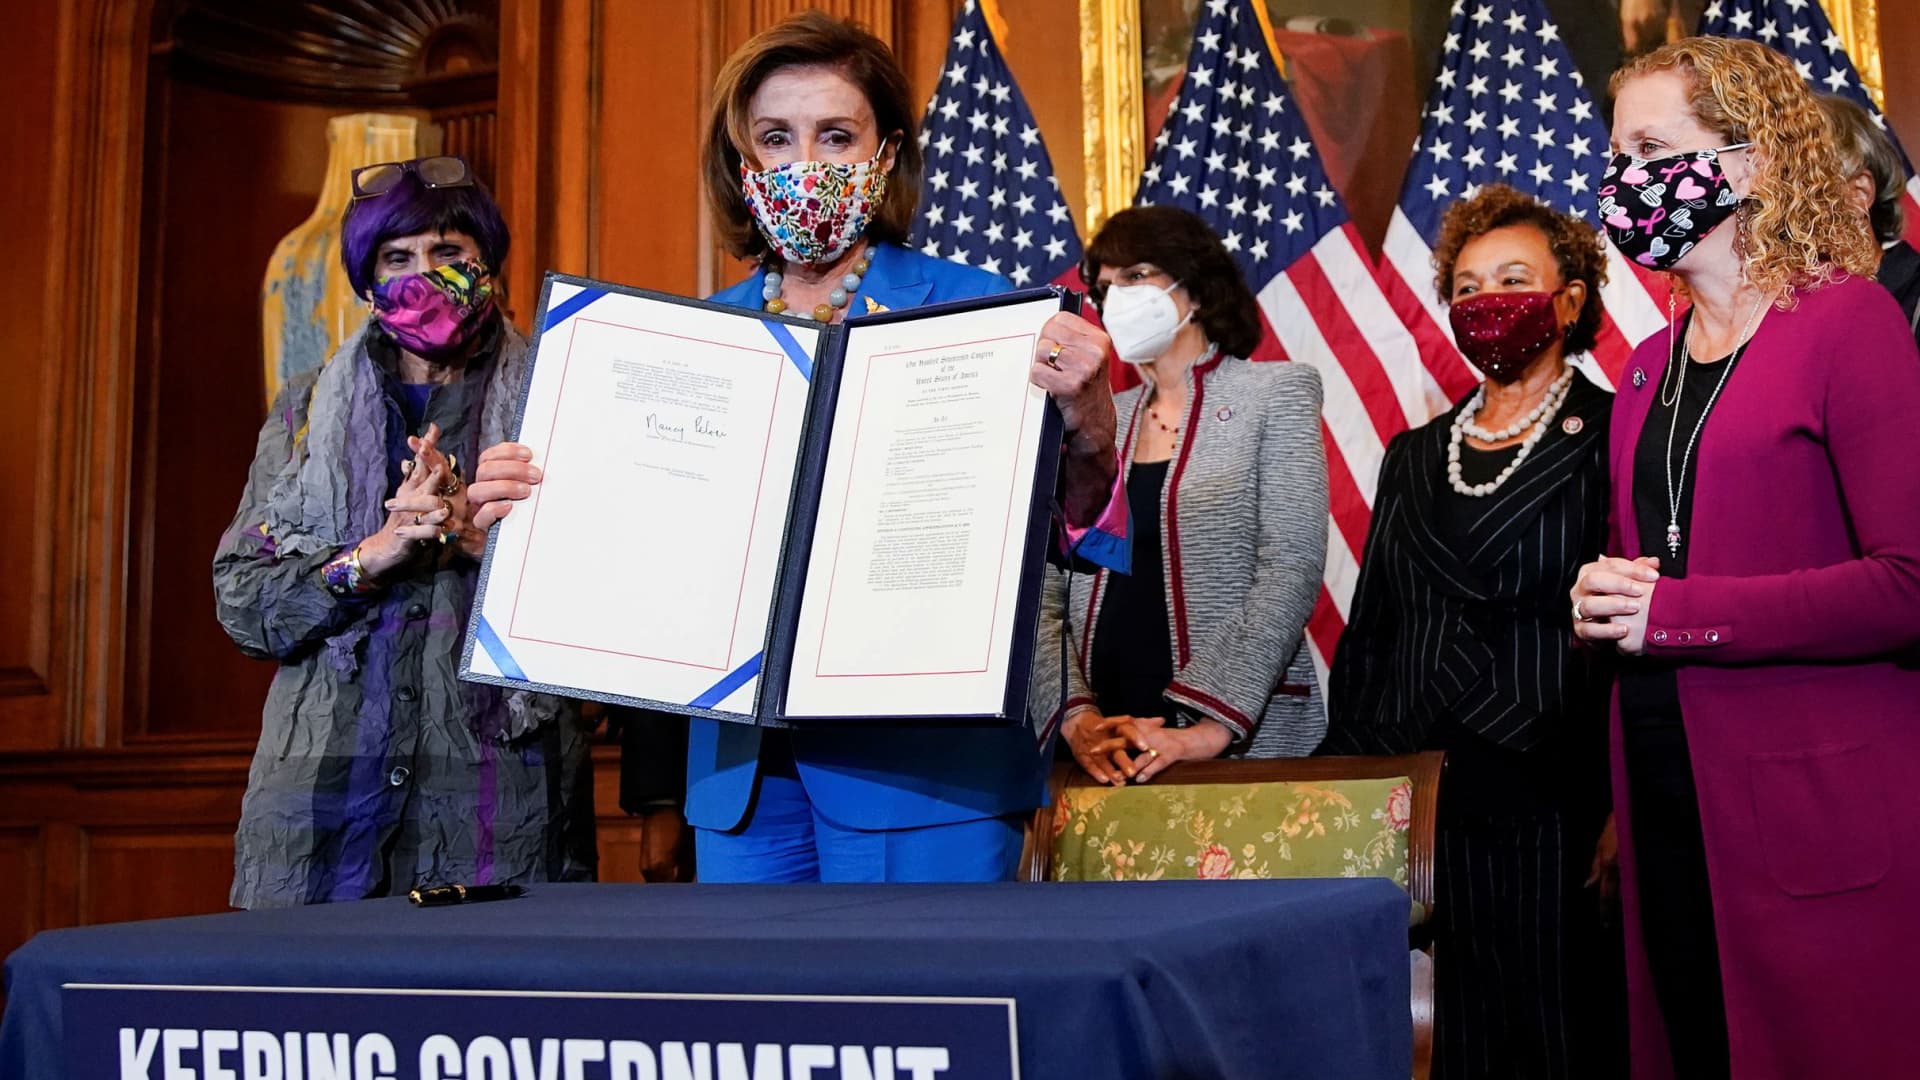 U.S. House Speaker Nancy Pelosi (D-CA) is flanked by members of the House Democratic Caucus as she holds the continuing resolution she signed to avoid a U.S. government shutdown during a bill enrollment ceremony on Capitol Hill in Washington, September 30, 2021.